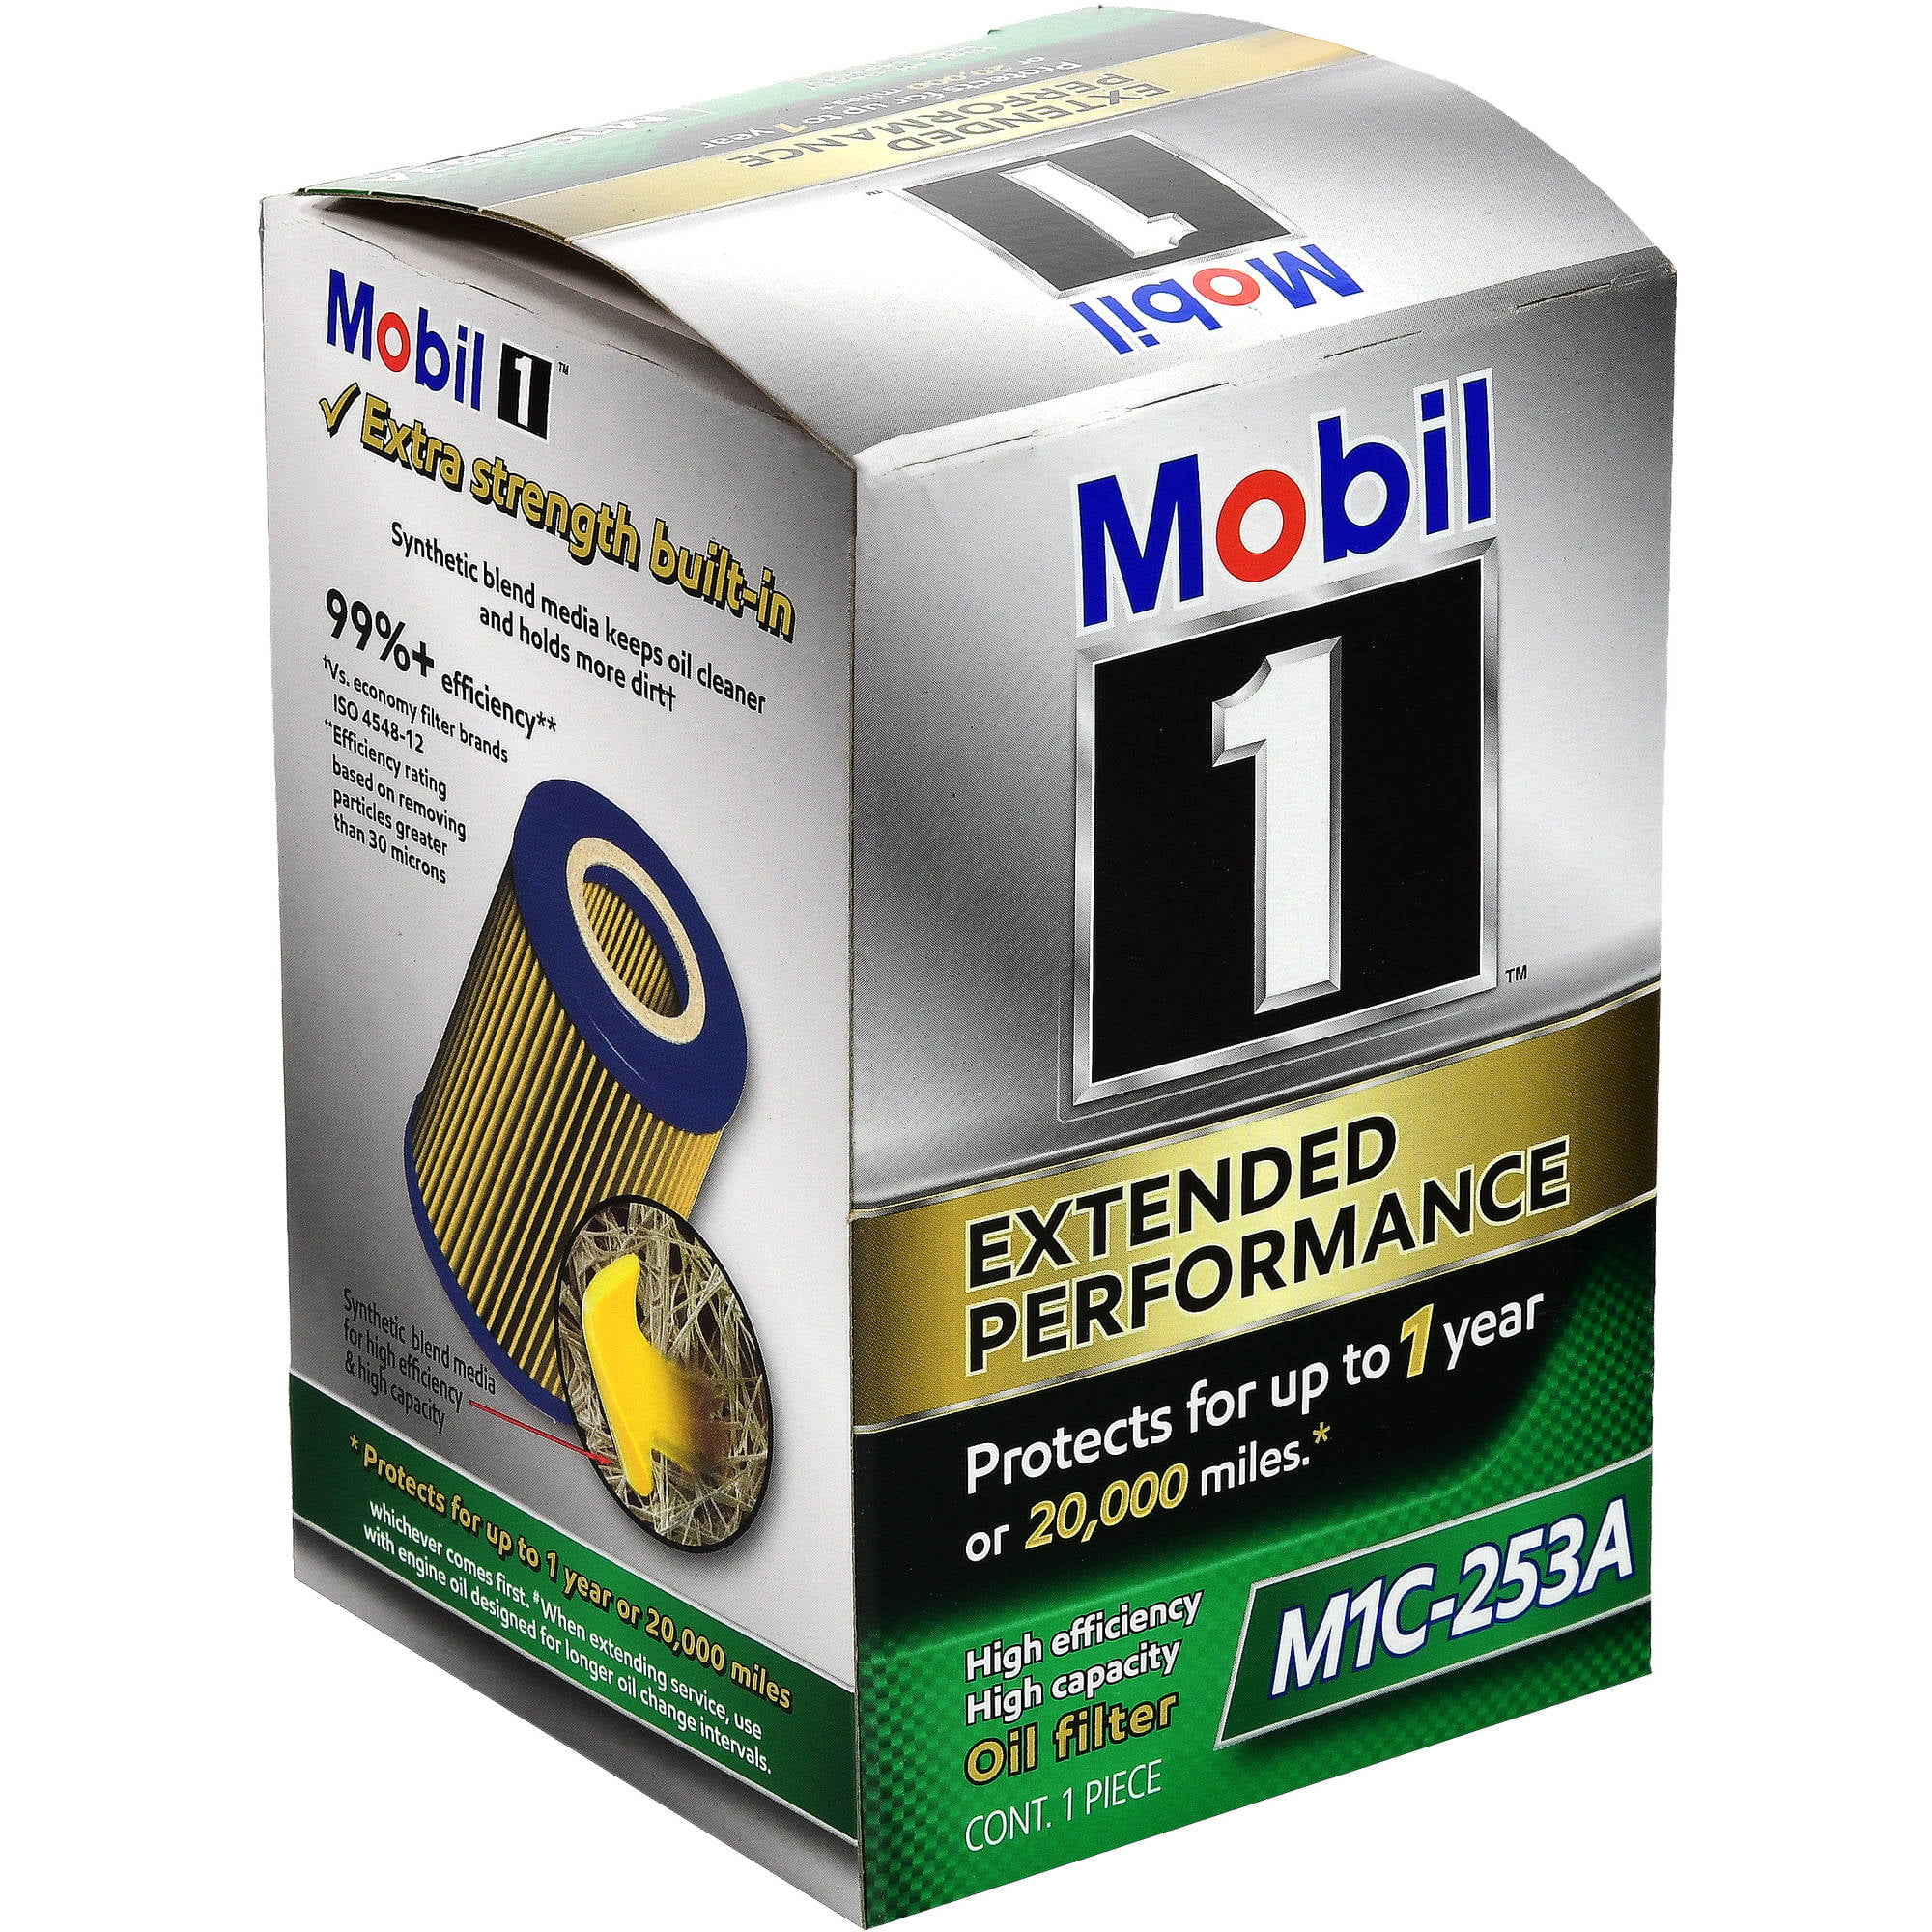 mobil-1-extended-performance-oil-filter-m1c-253a-1-count-walmart